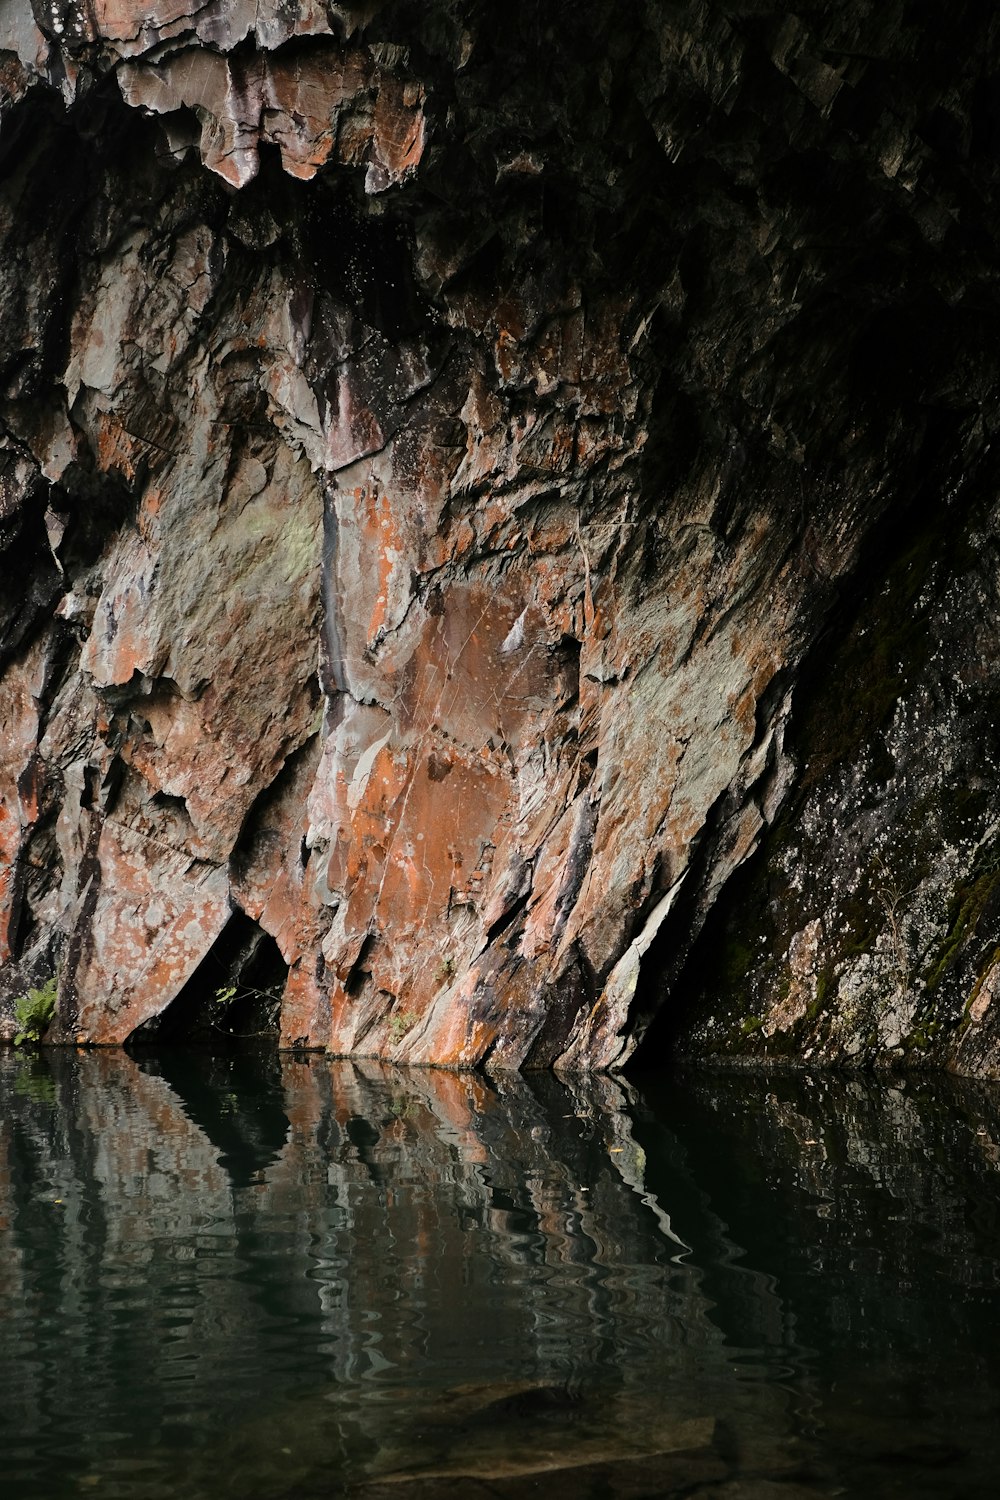 brown and gray rock formation beside body of water during daytime